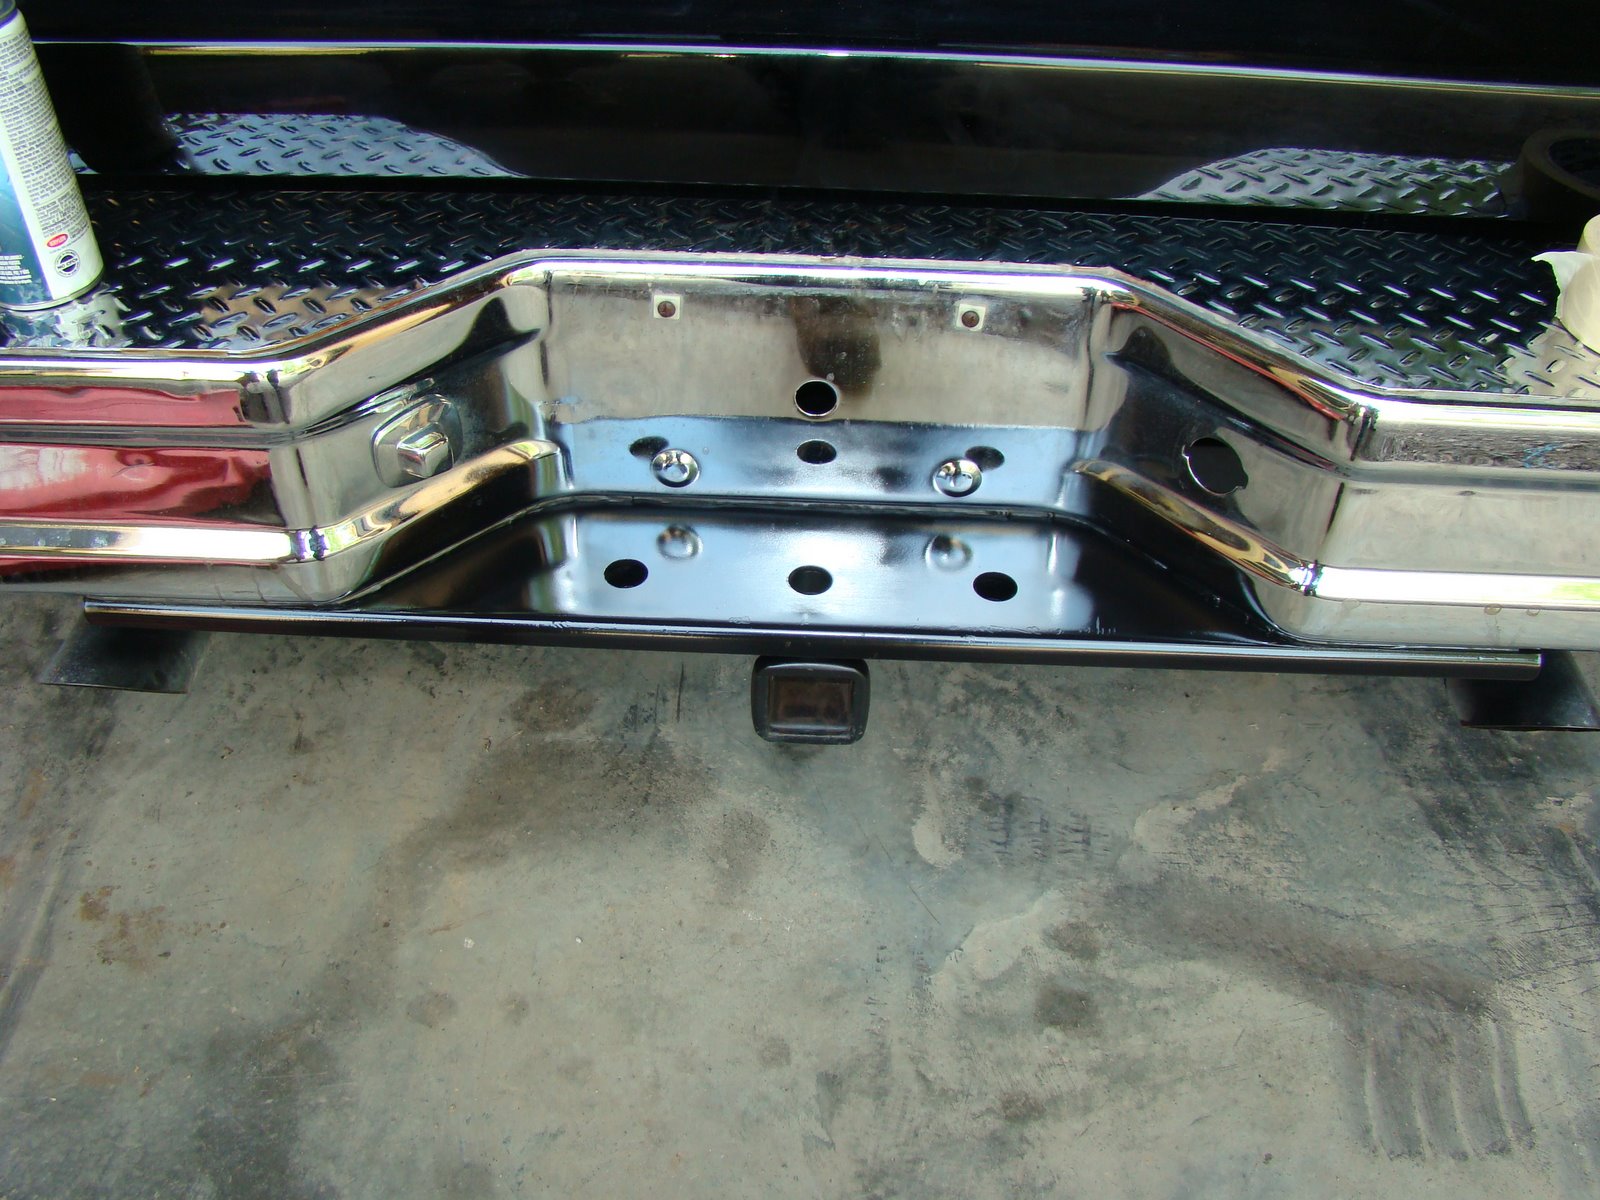 TrucksnCars: 1986 K10 rear bumper and tail lite